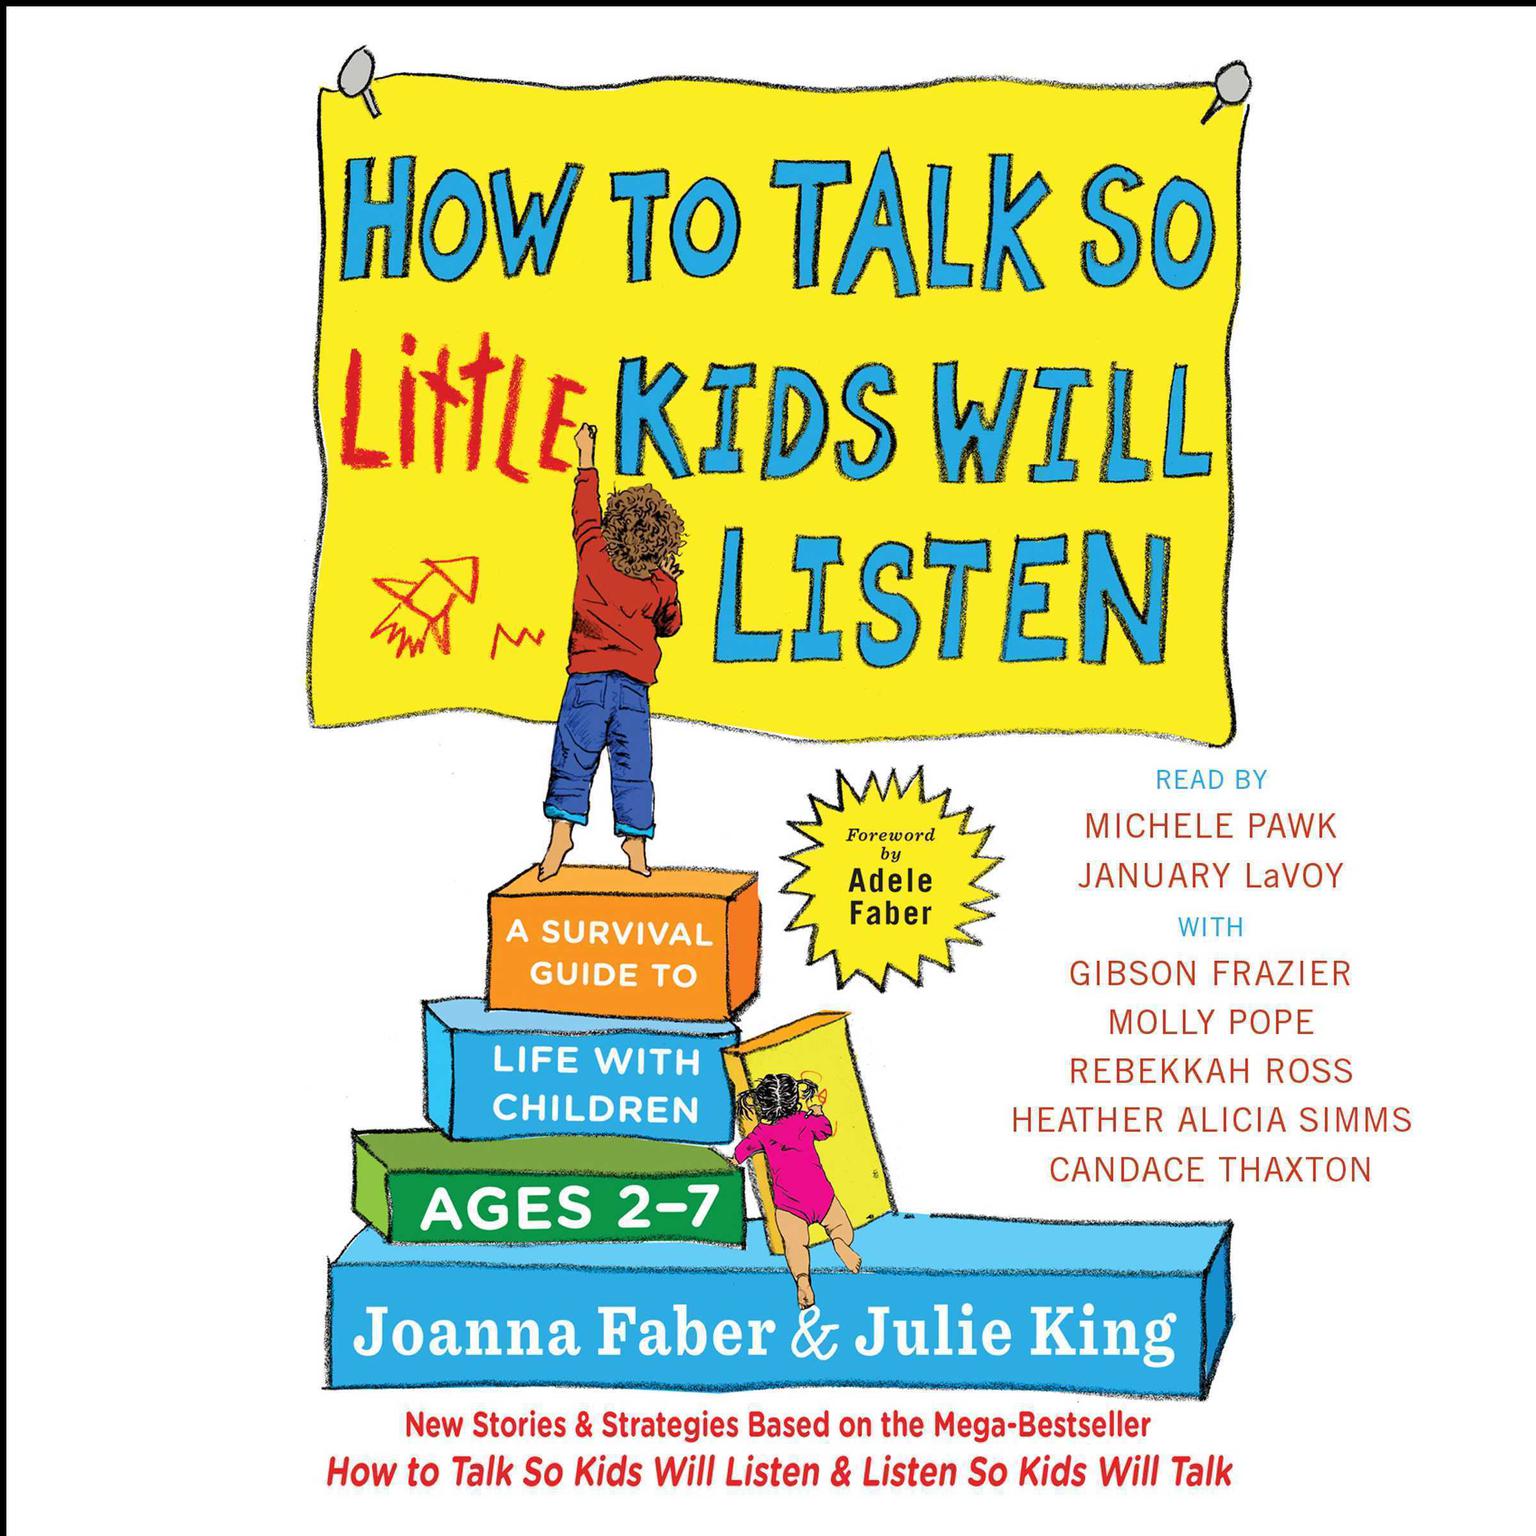 How to Talk So Little Kids Will Listen: A Survival Guide to Life with Children Ages 2-7 Audiobook, by Joanna Faber